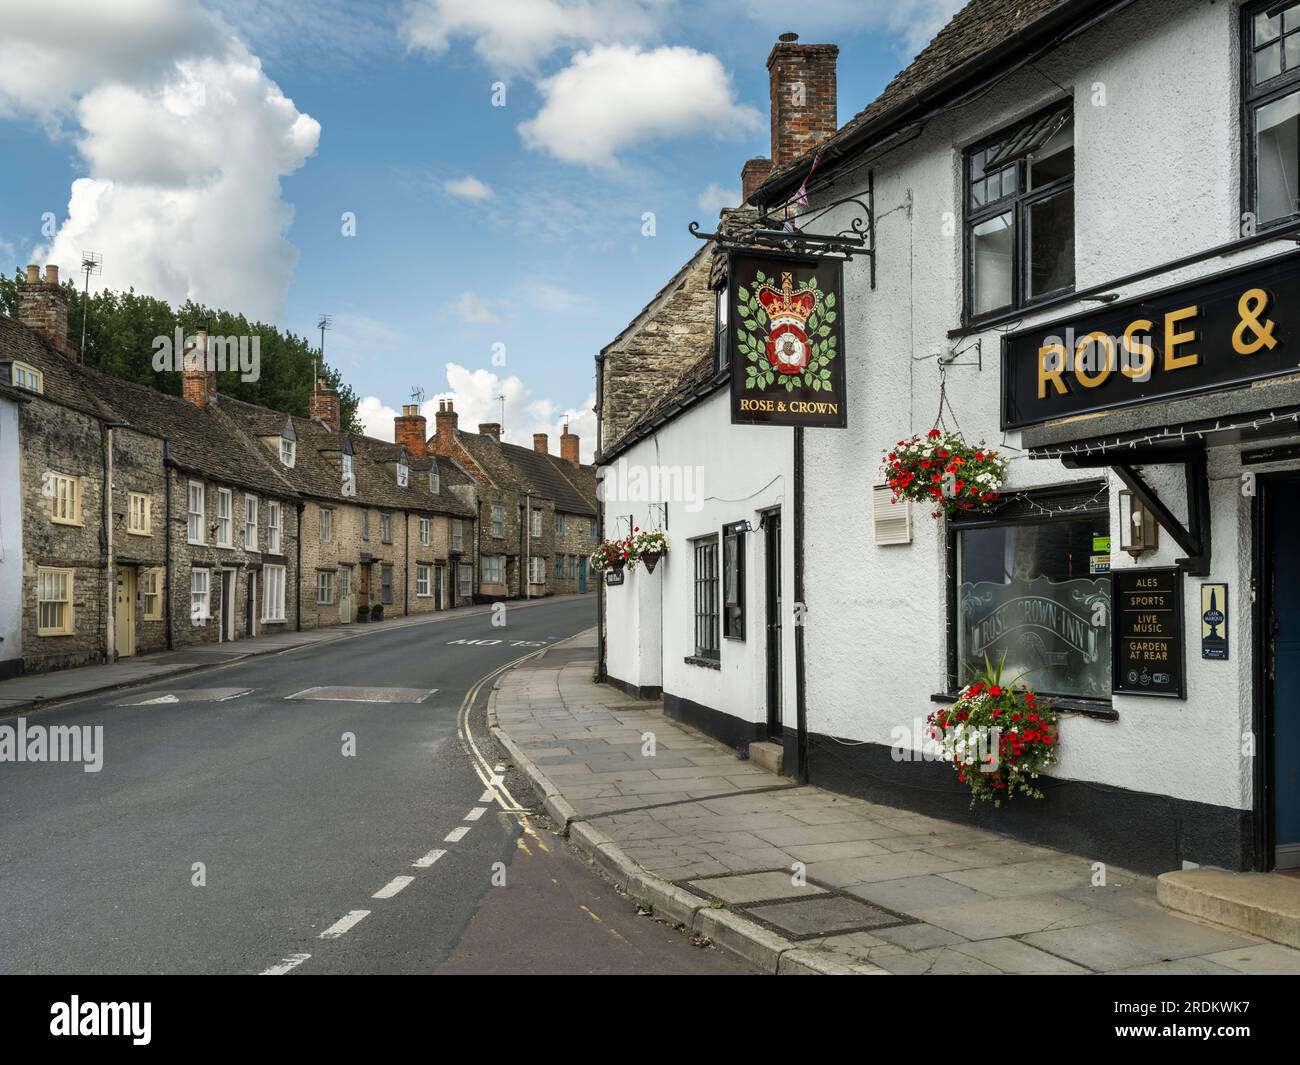 The Rose & Crown public house on the High Street in the picturesque market town of Malmesbury, Wiltshire, England. Stock Photo